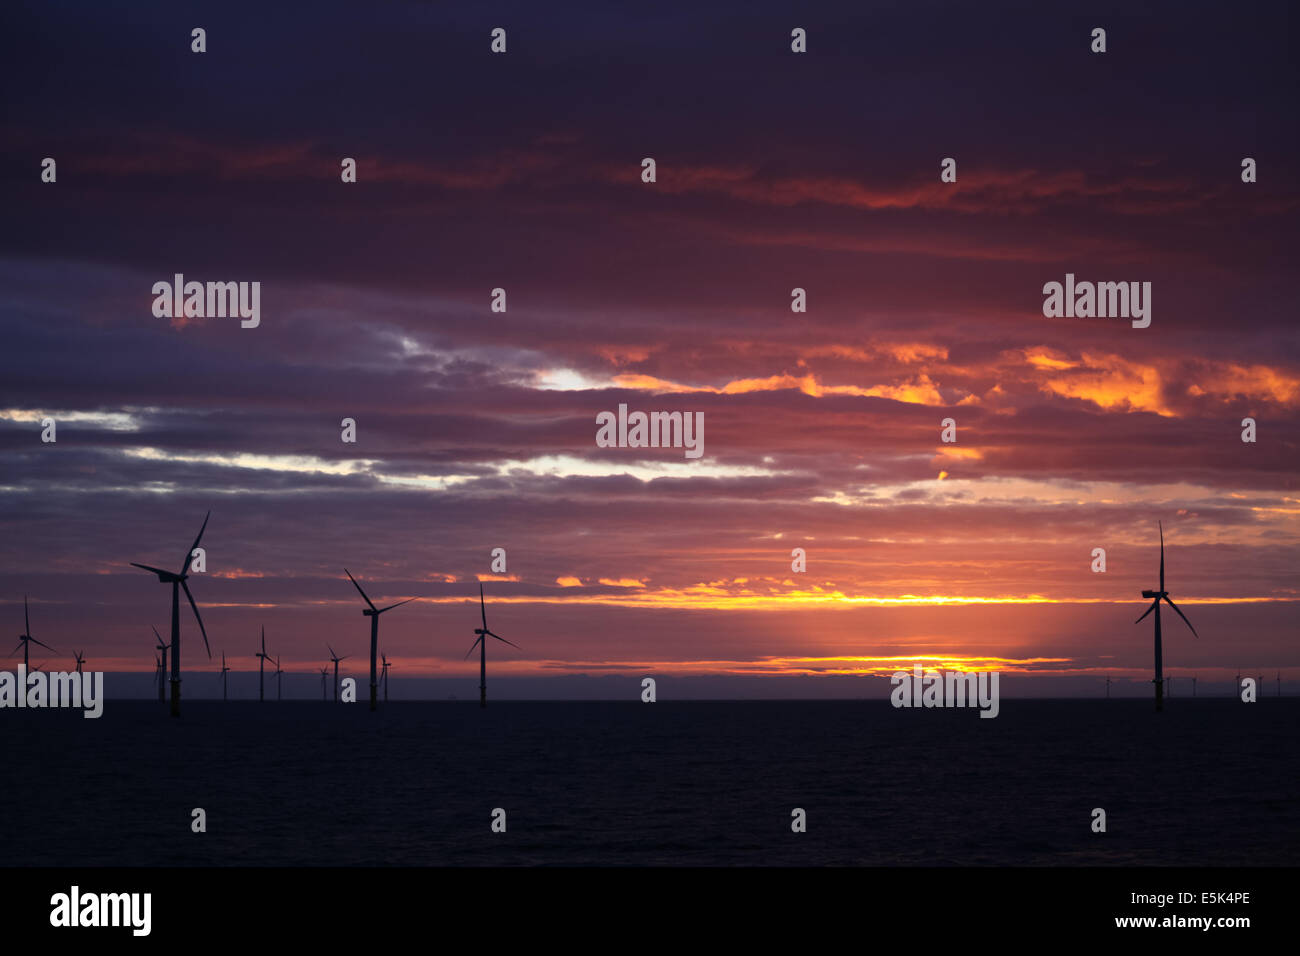 Sunrise on the Gwynt y Mor Offshore Wind Farm off the coast of North Wales during the construction phase of spring 2014 Stock Photo